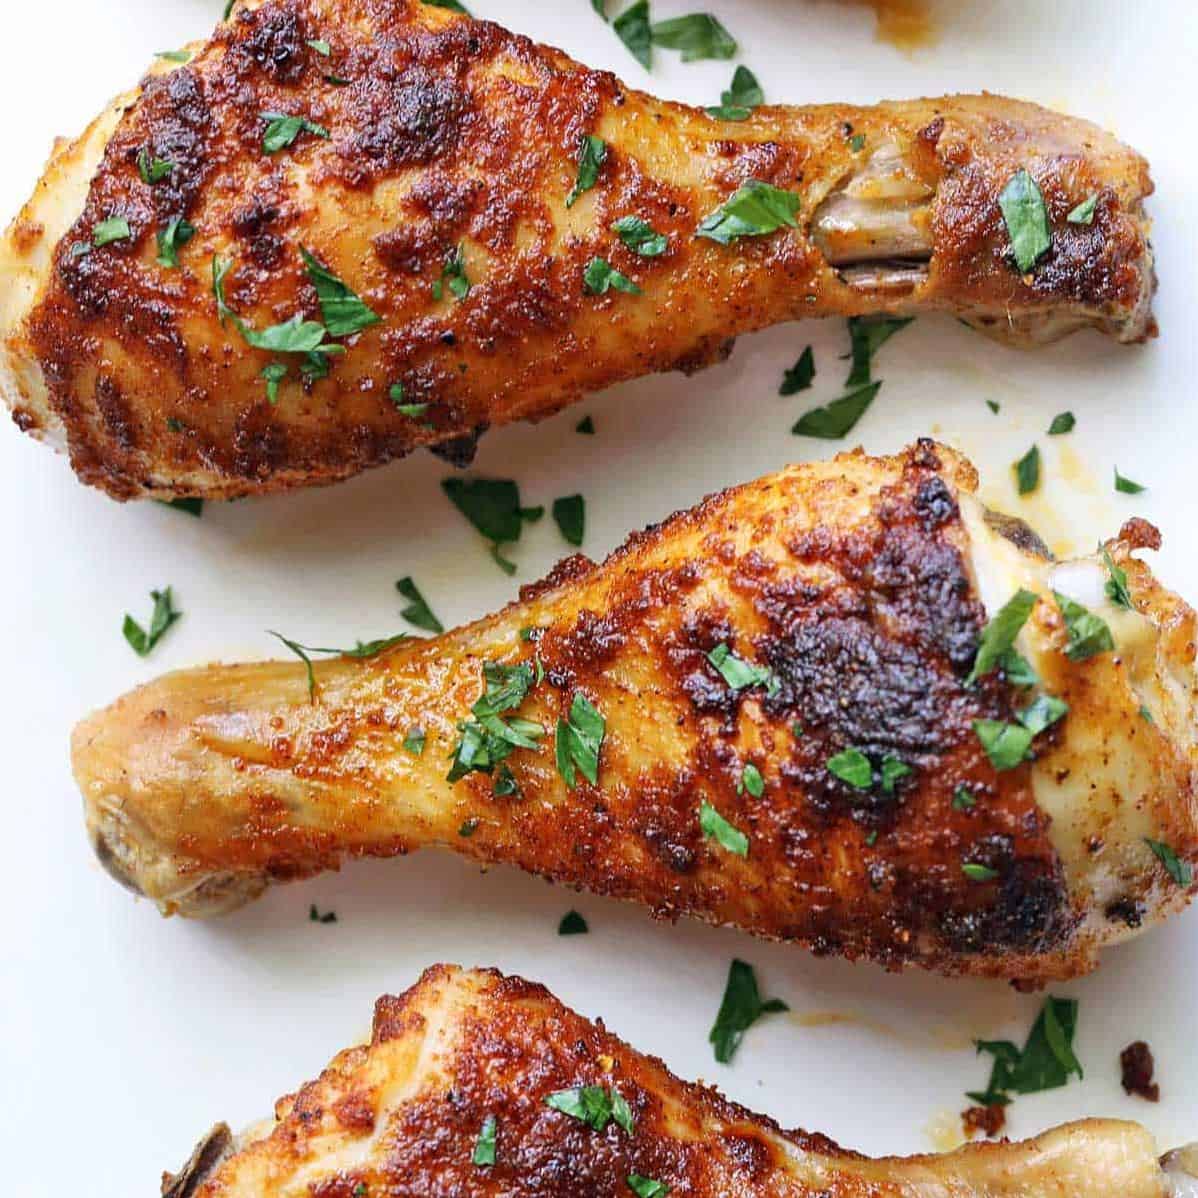  These drumsticks are baked to perfection - juicy and tender on the inside, crispy and flavorful on the outside!